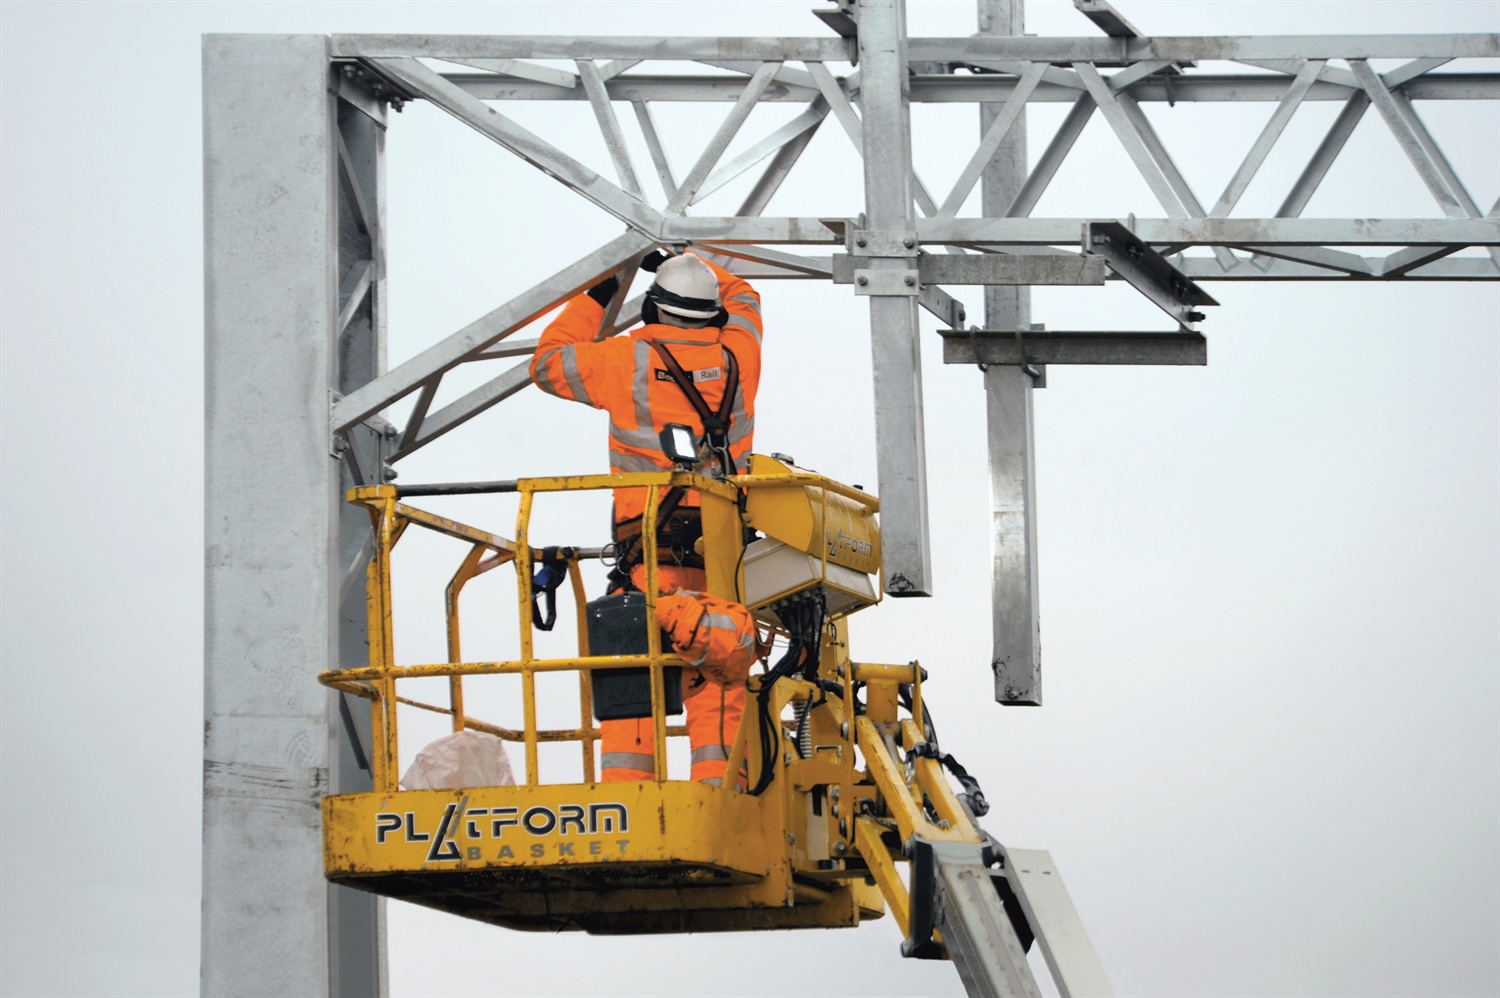 Electrification issues: Who knew what and when?